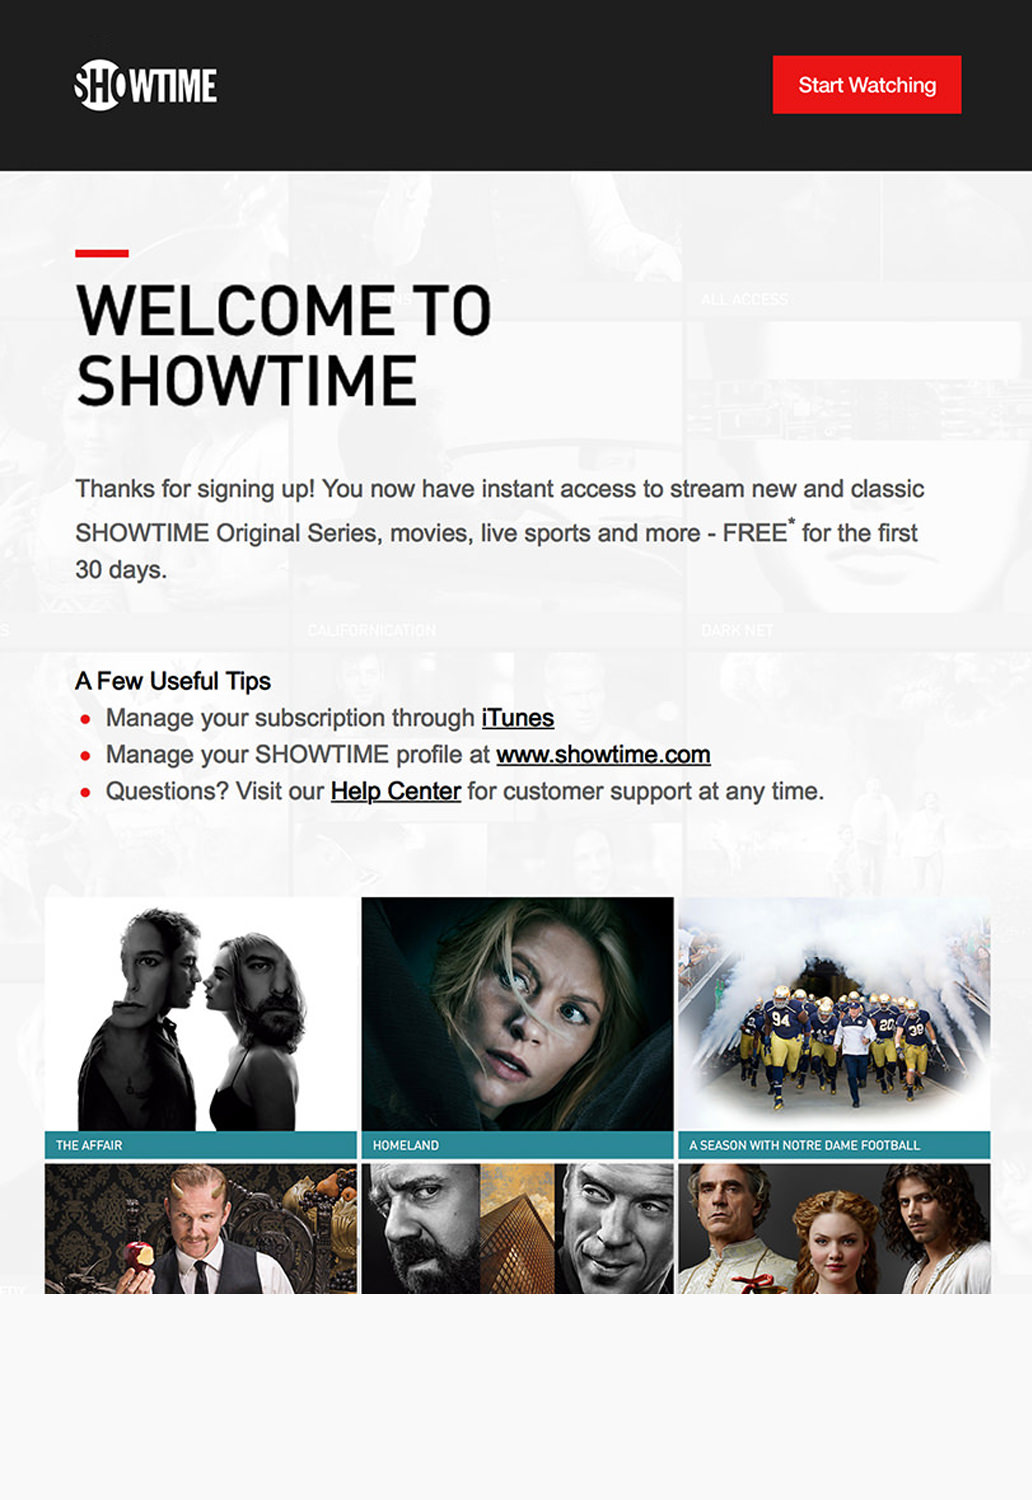 Media and Entertainment Email Marketing - Showtime